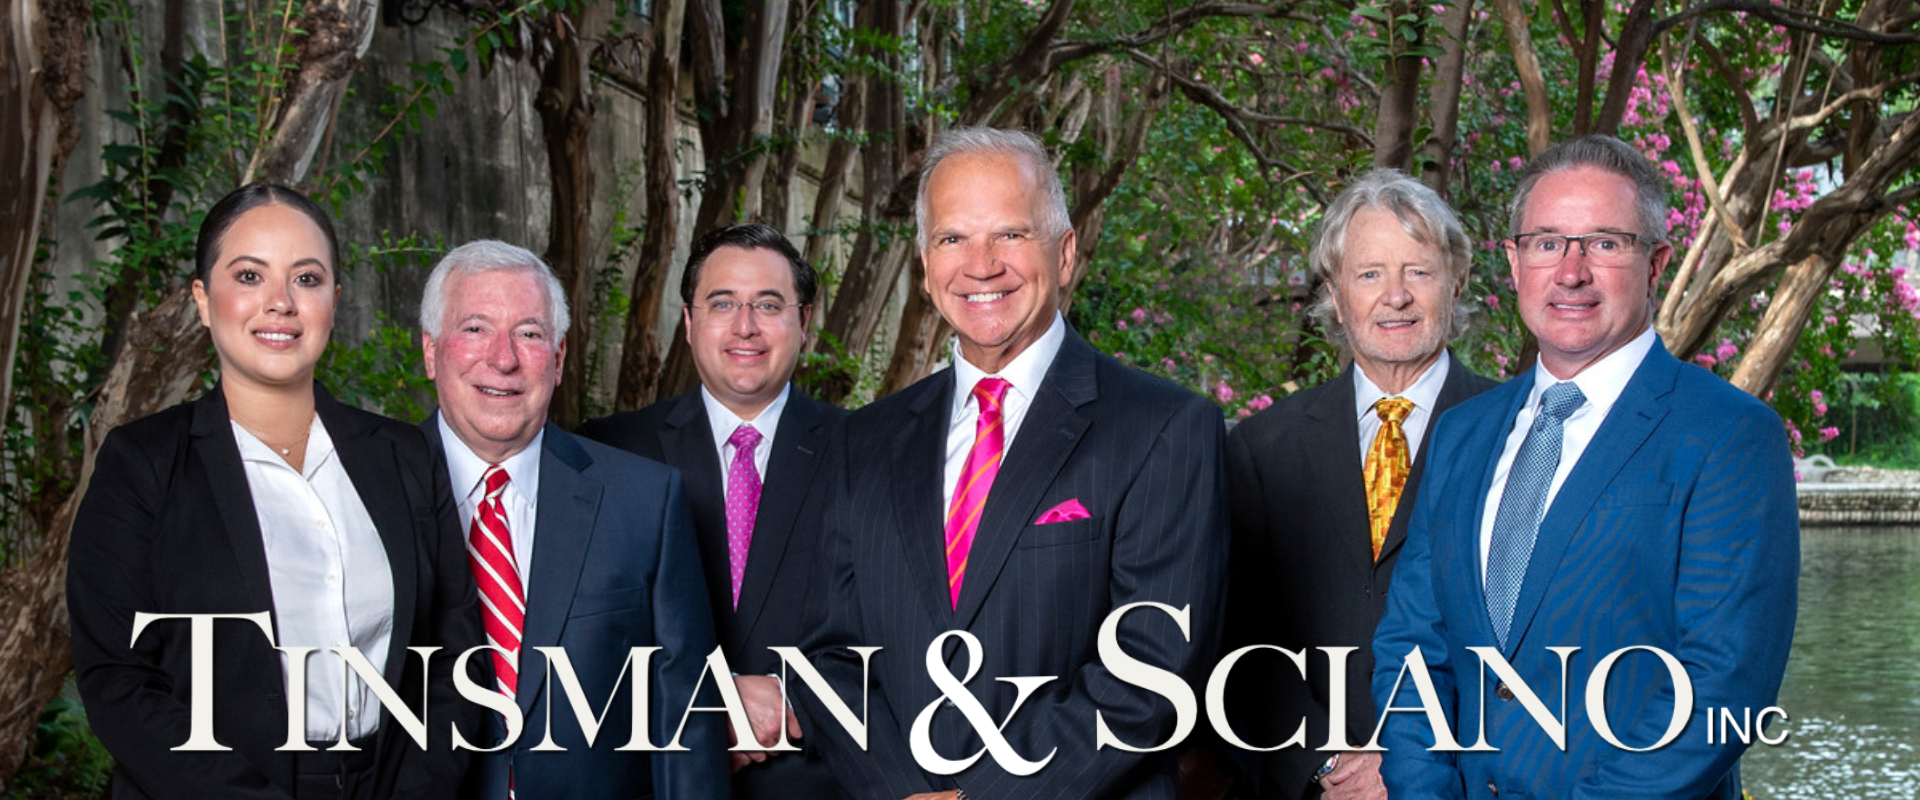 The attorneys of Tinsman & Sciano Inc.